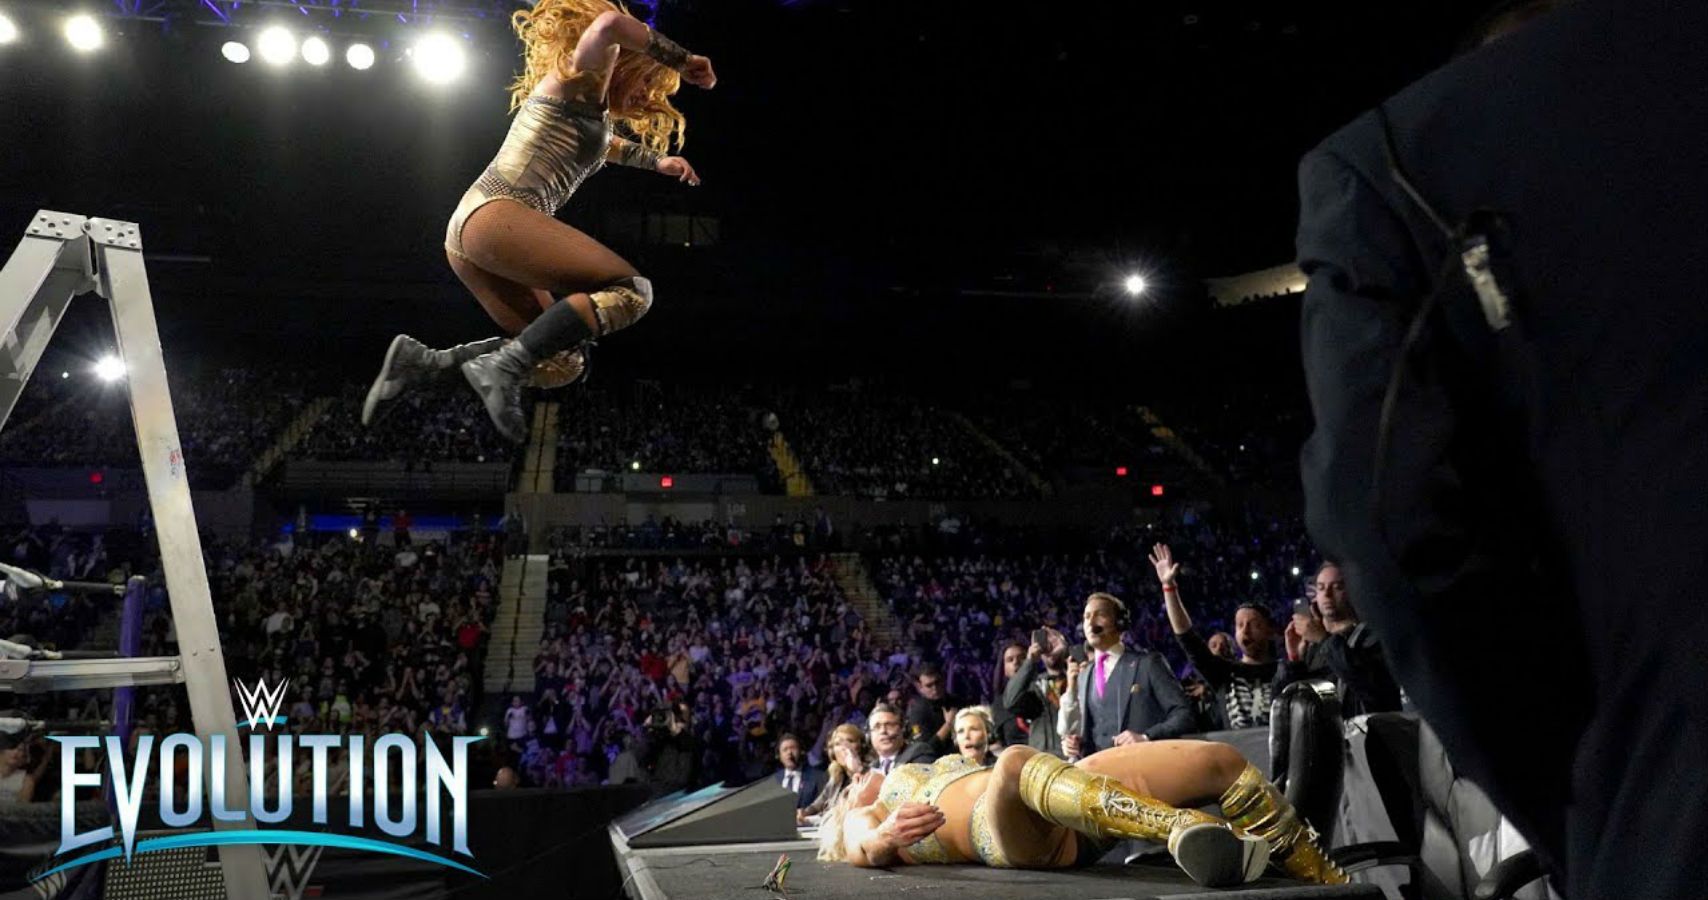 Becky Lynch dives onto charlotte from a ladder